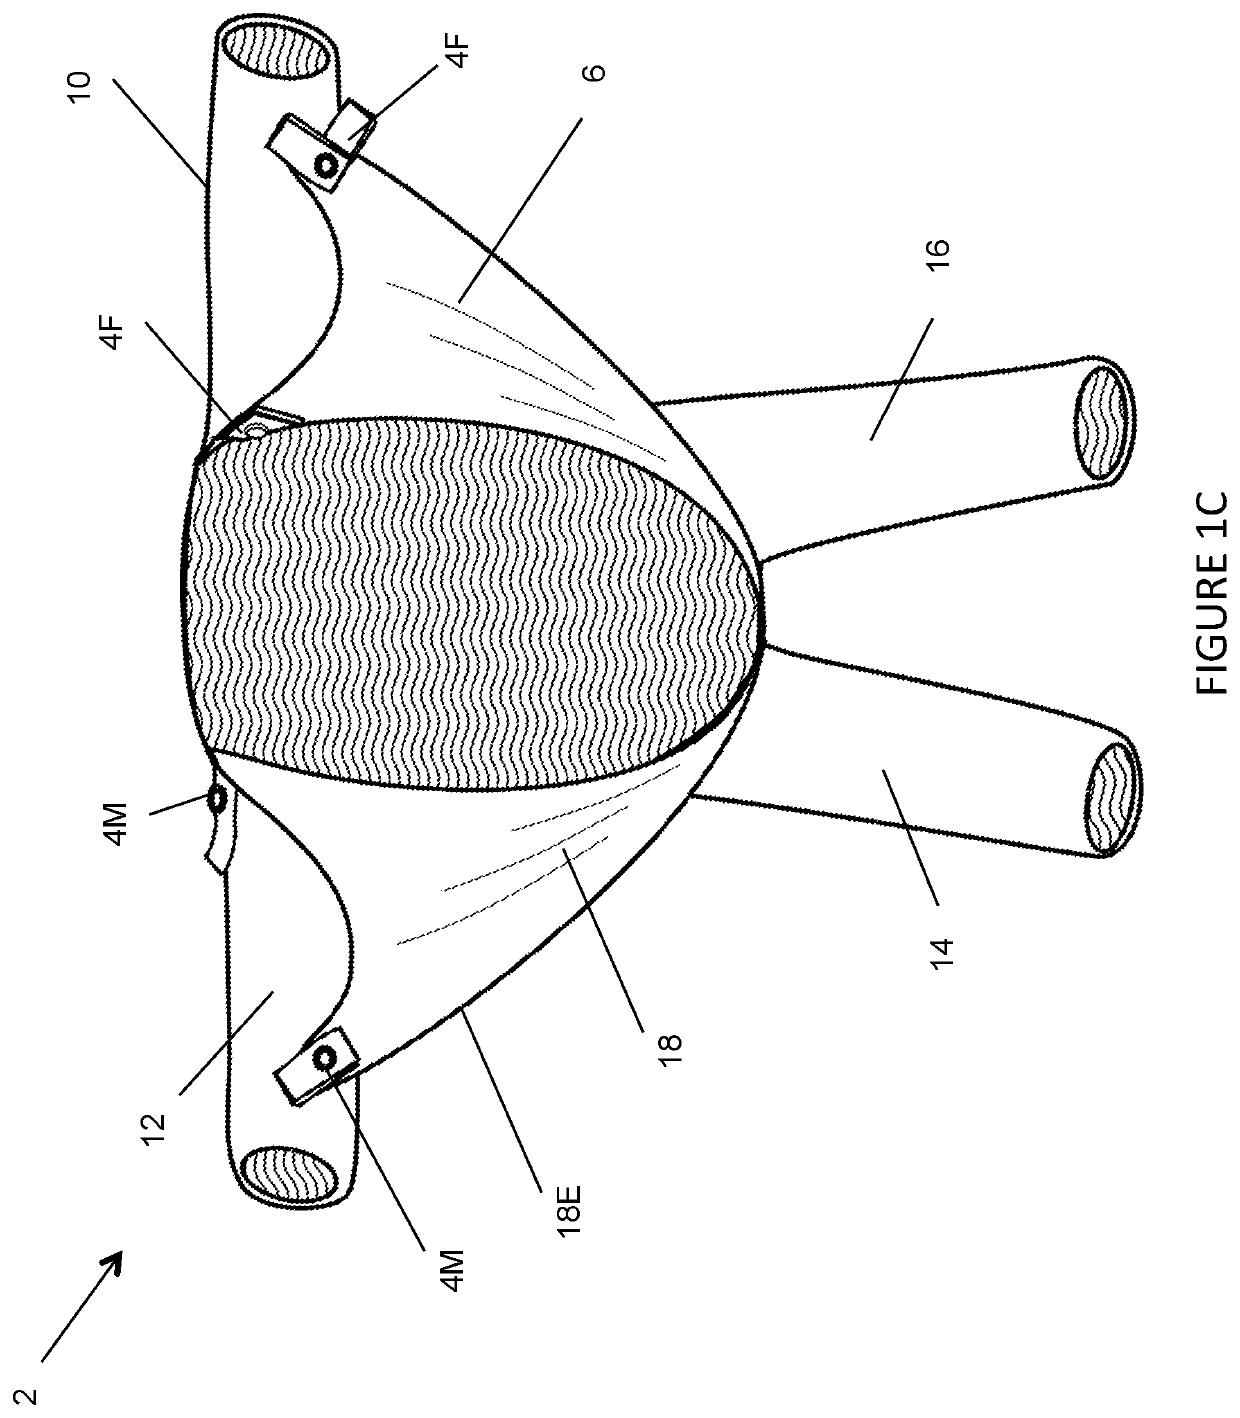 Clothing selectively enabling skin-to-skin contact